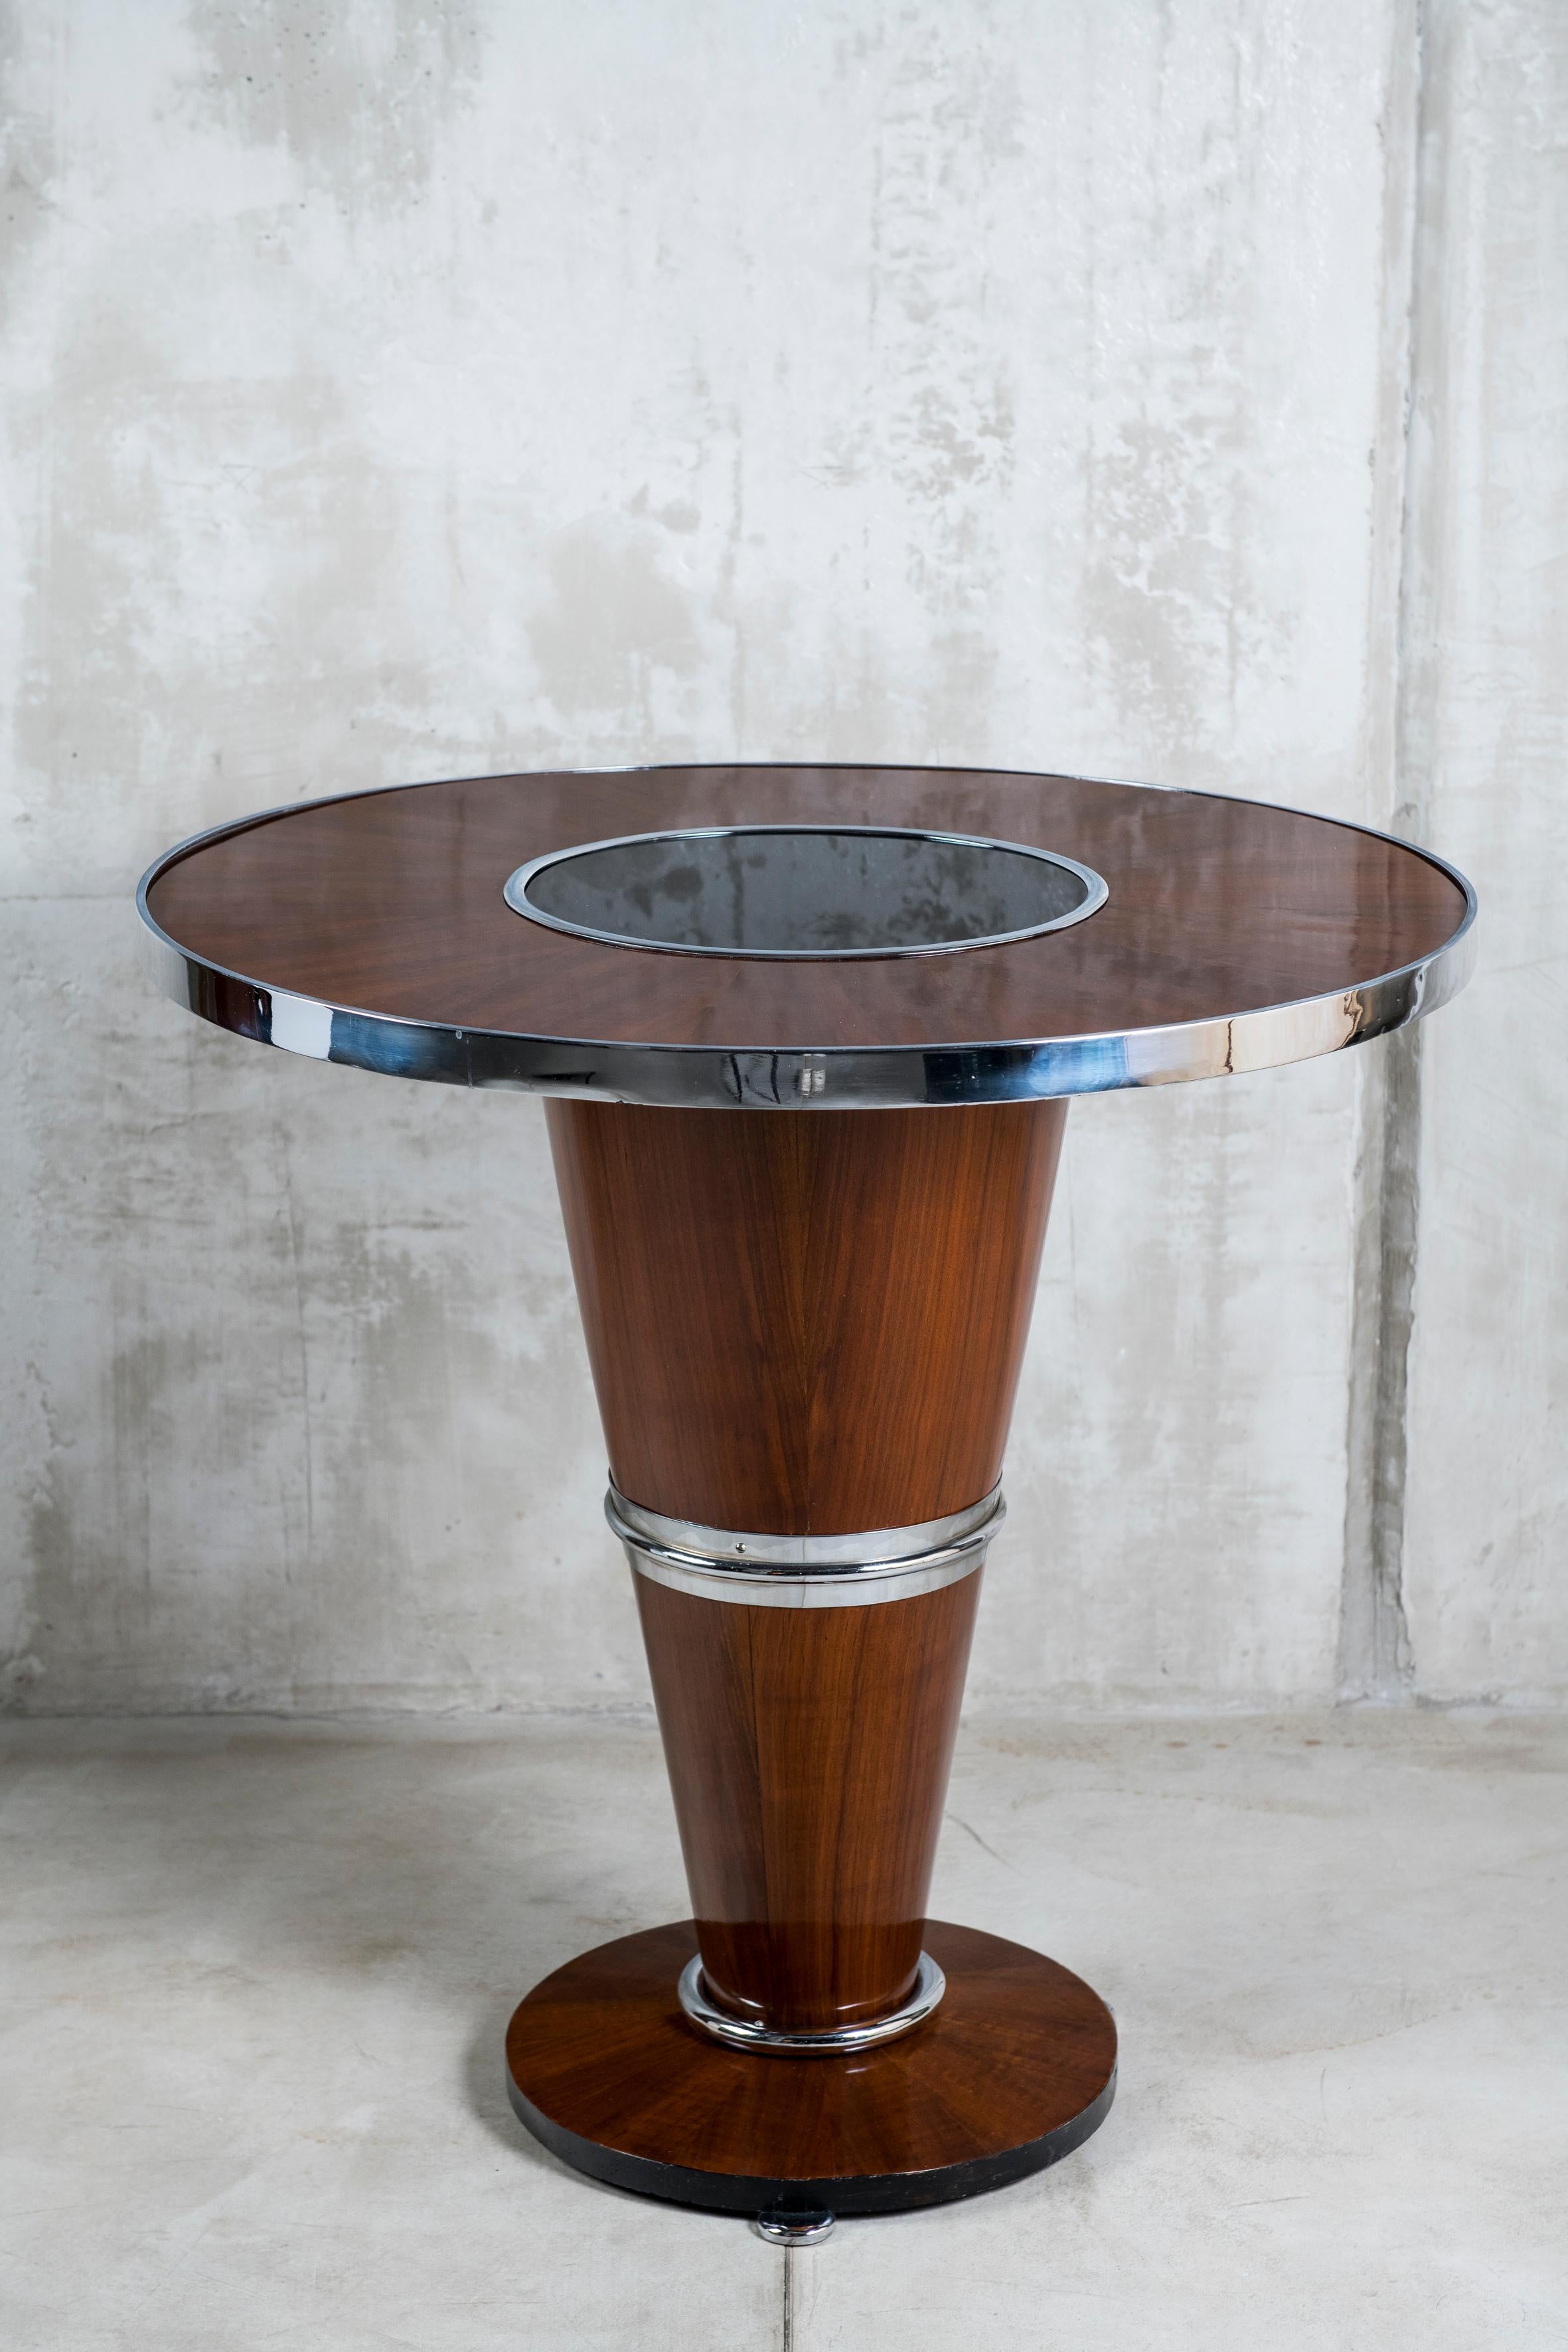 Wood, chrome and glass table. Art Deco period, France, circa 1930-1940.